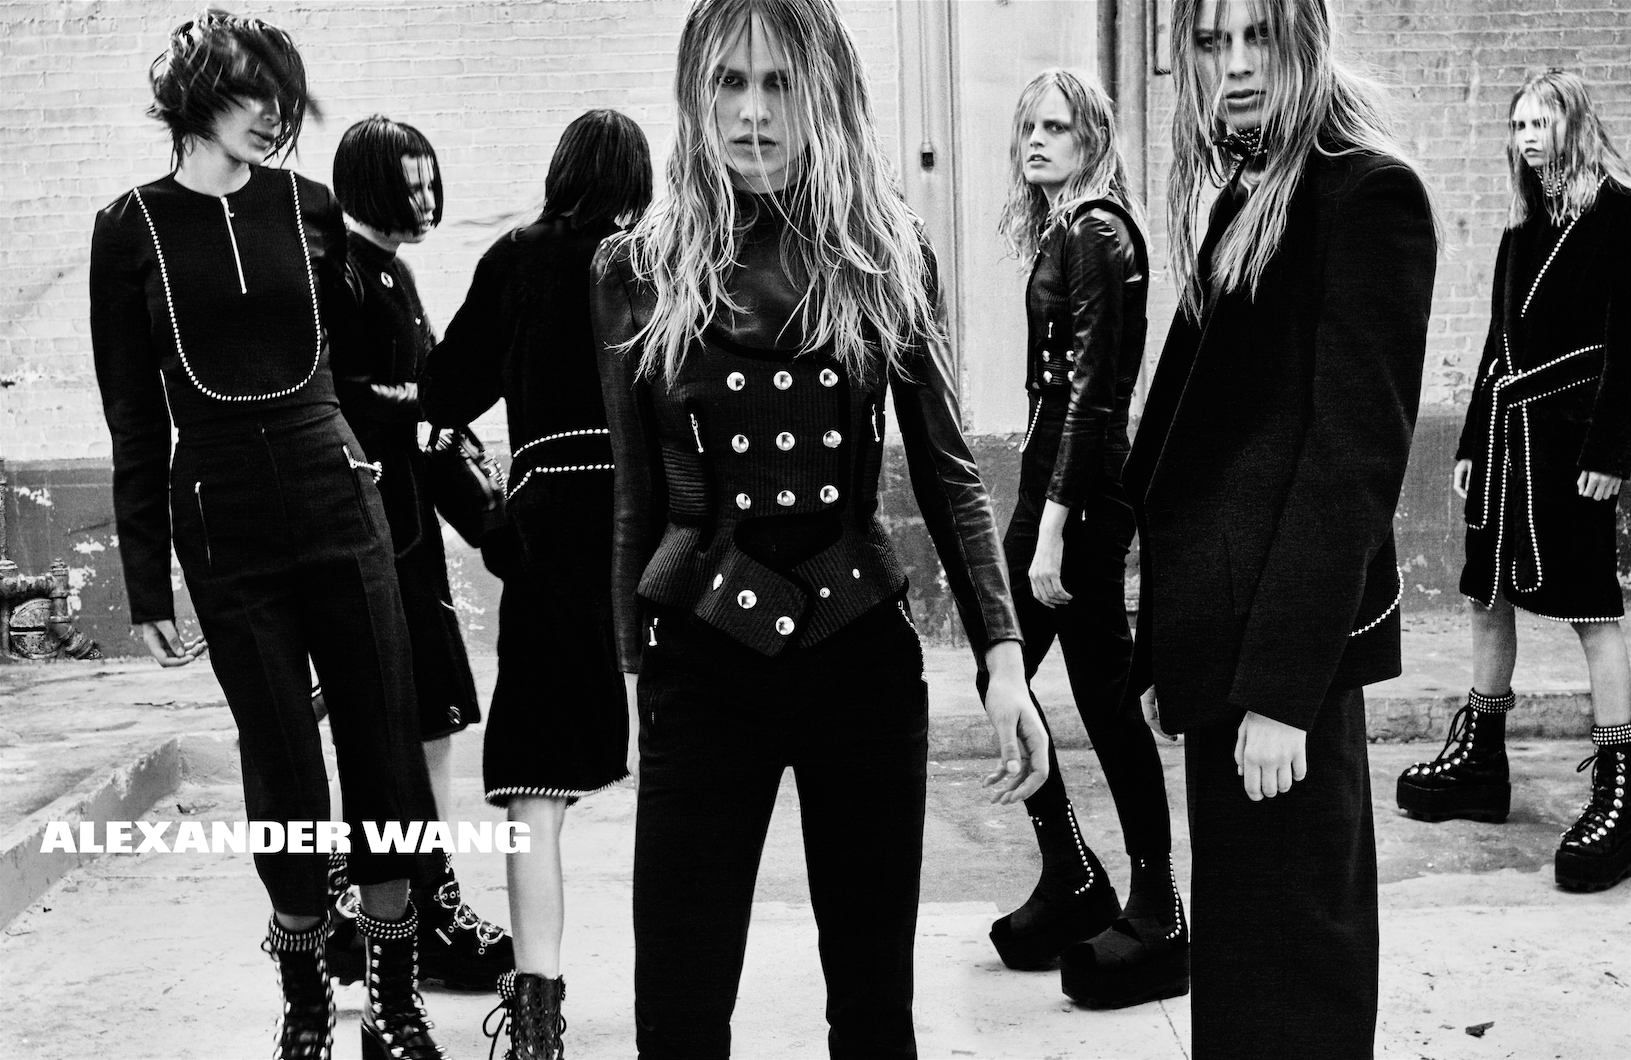 ALEXANDER WANG FW15 CAMPAIGN BY STEVEN KLEIN